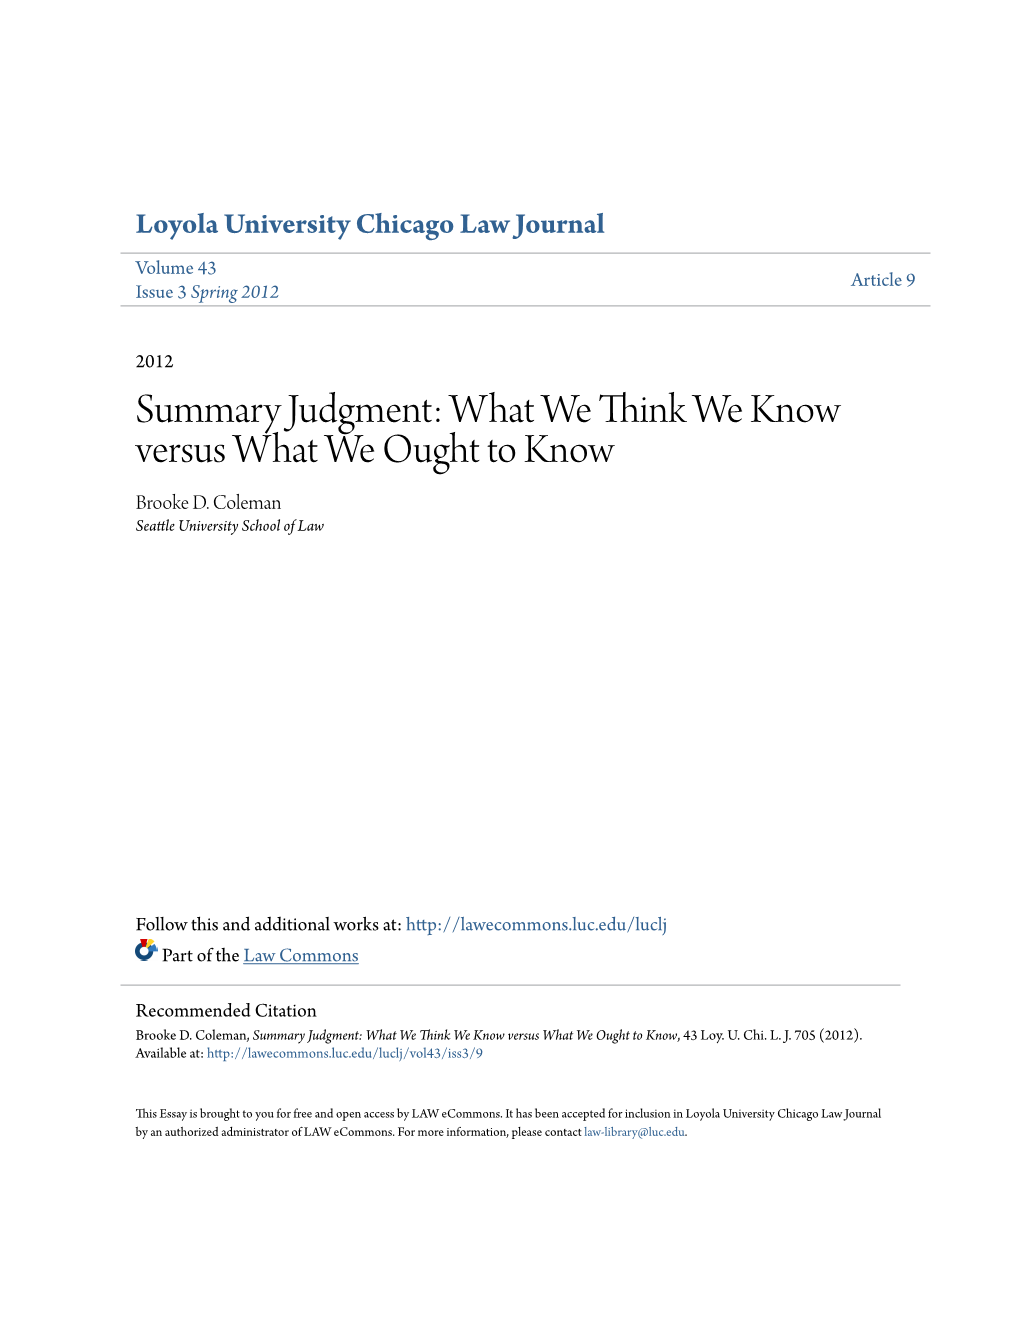 Summary Judgment: What We Think We Know Versus What We Ought to Know, 43 Loy